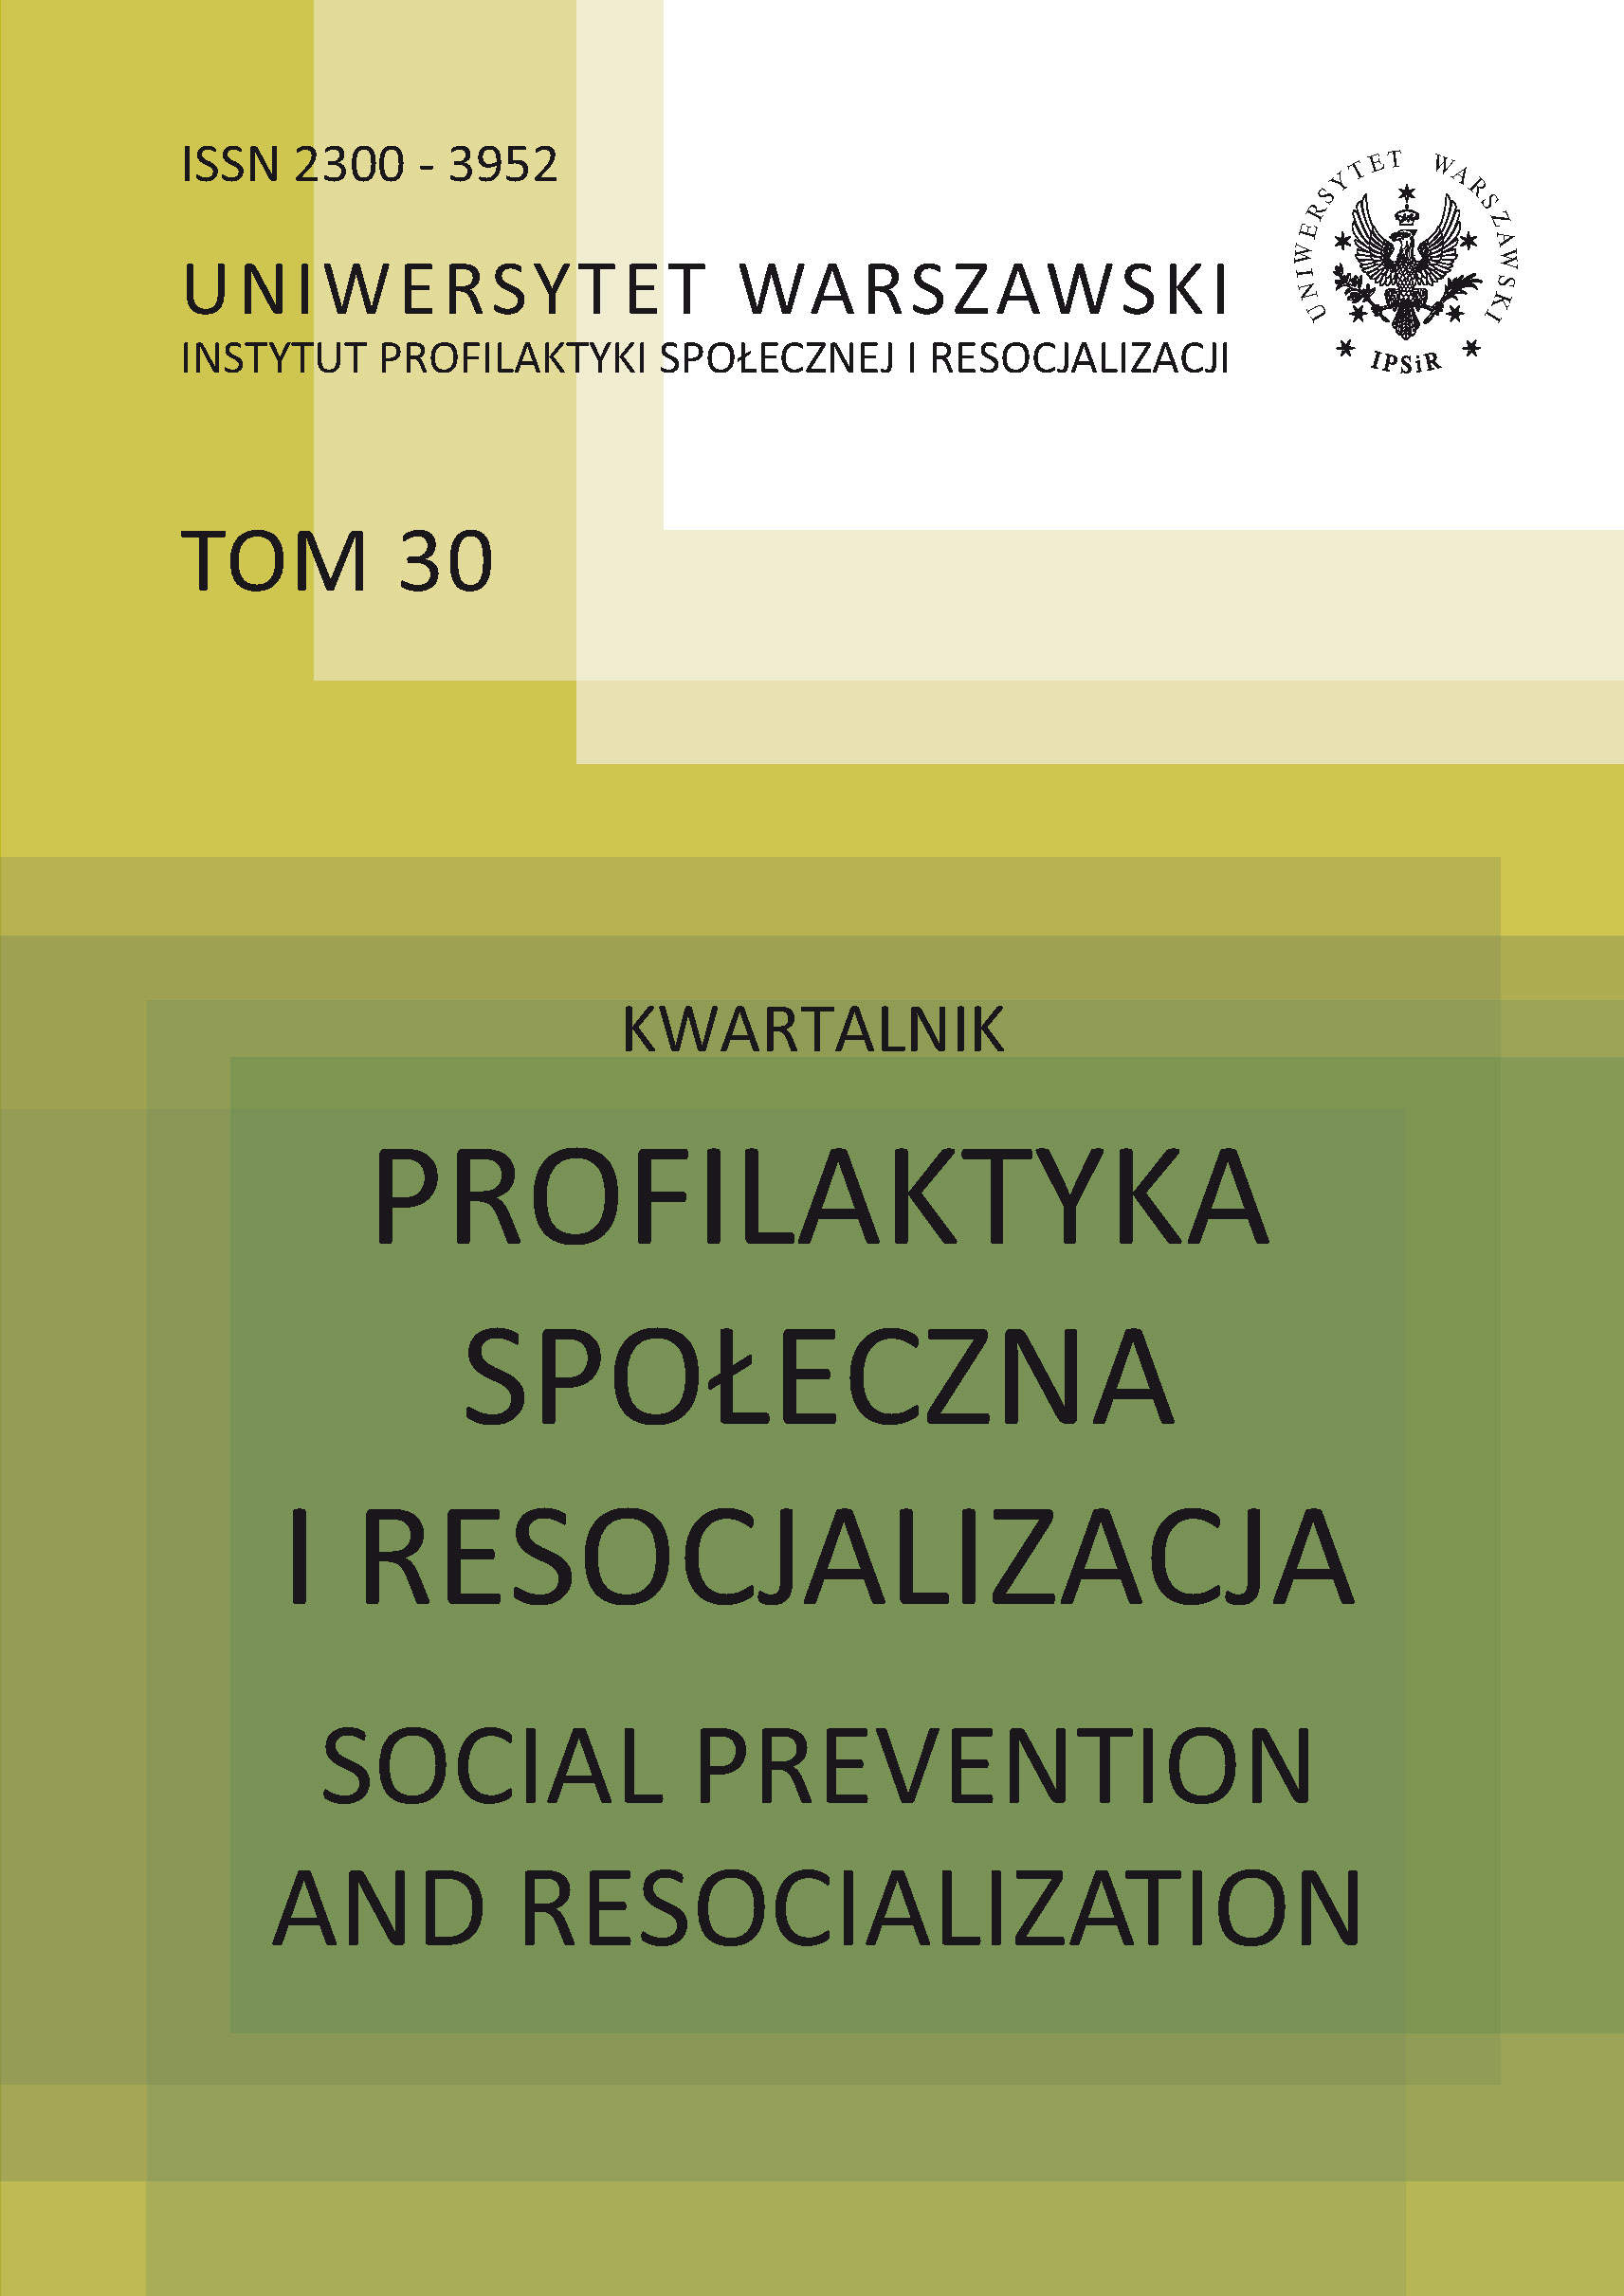 An Epitaph to Honor Late Professor Wiktor Zdorowienko. Cover Image